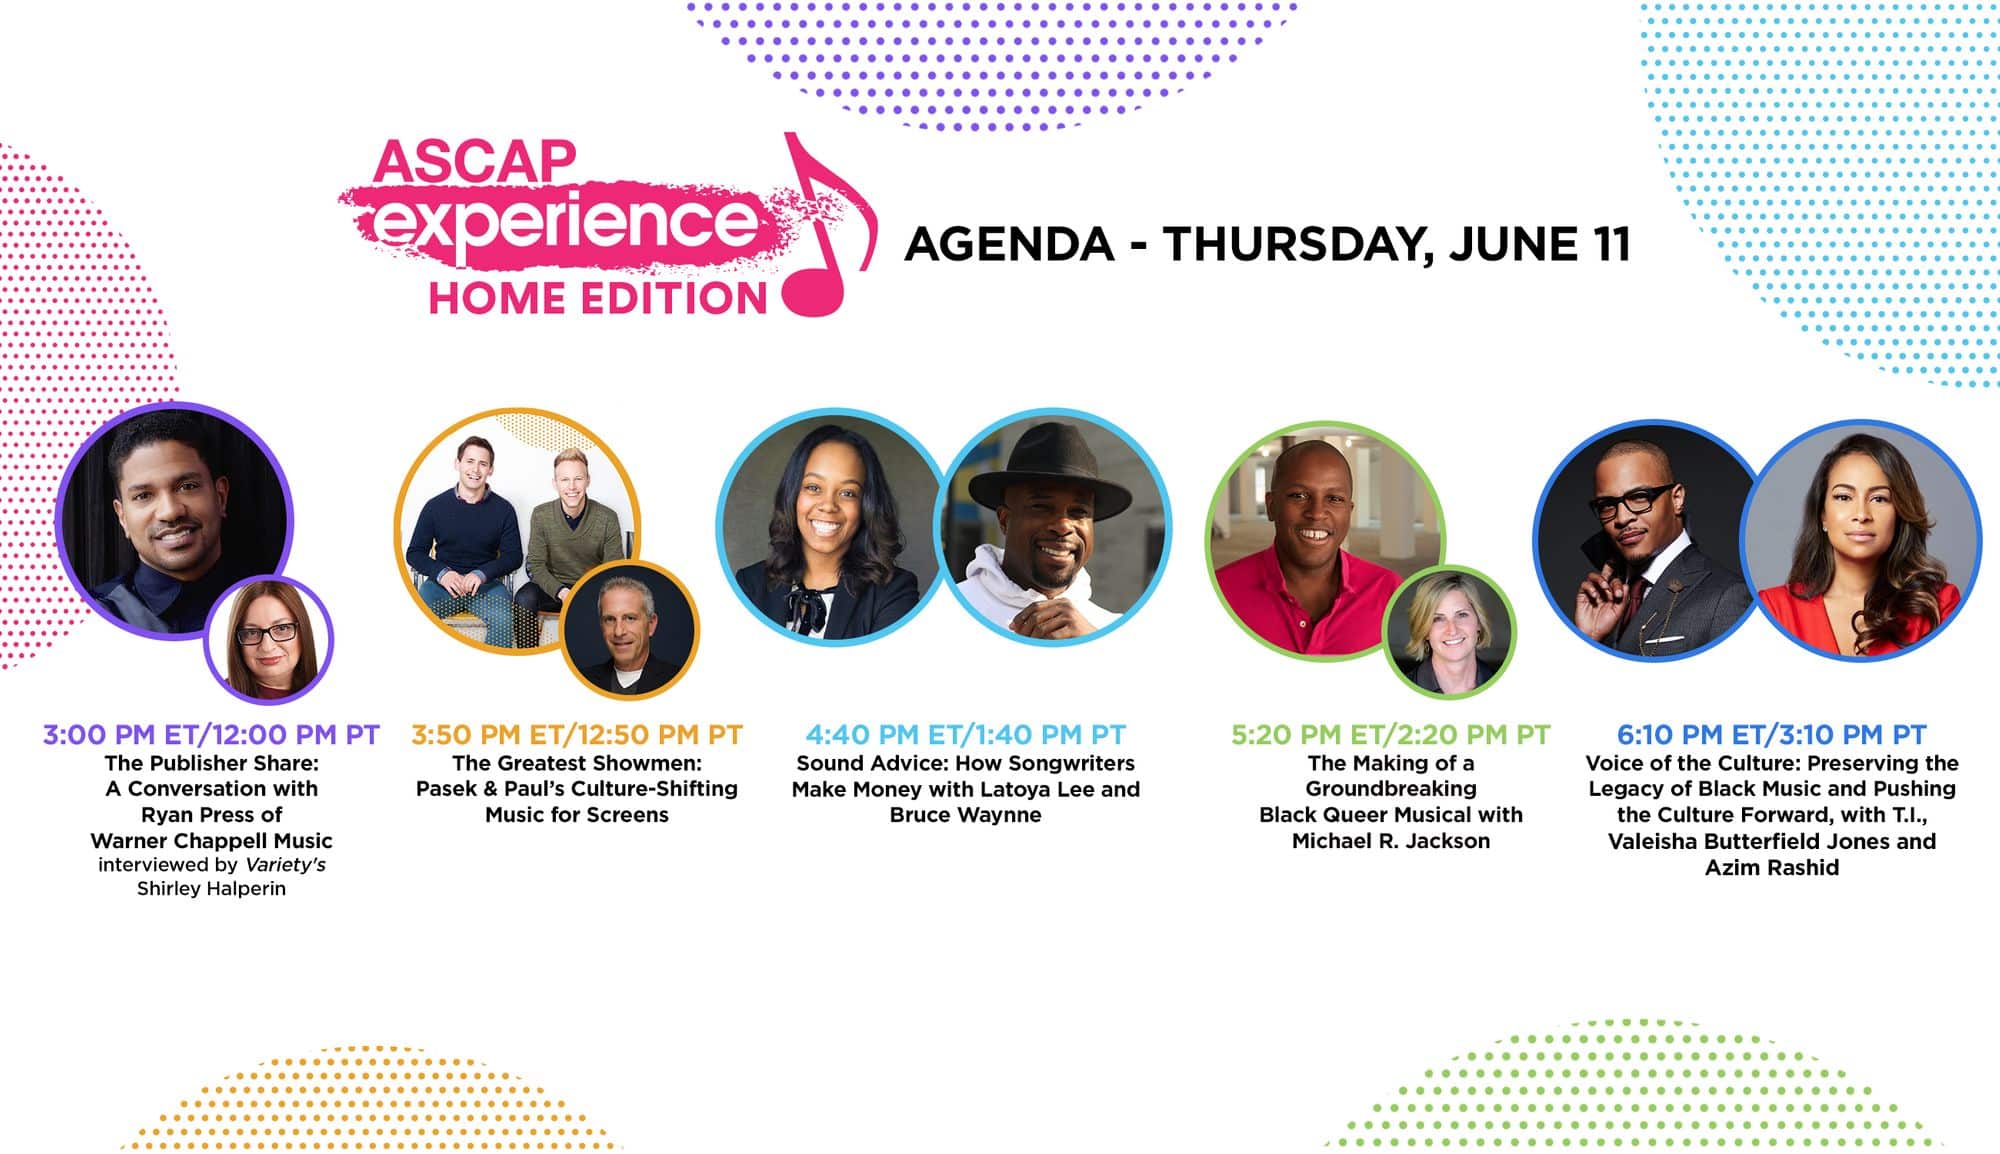 The ASCAP Experience: Home Edition Webinars Offers Free Music Insider Tips For All Songwriters Thursday June 11